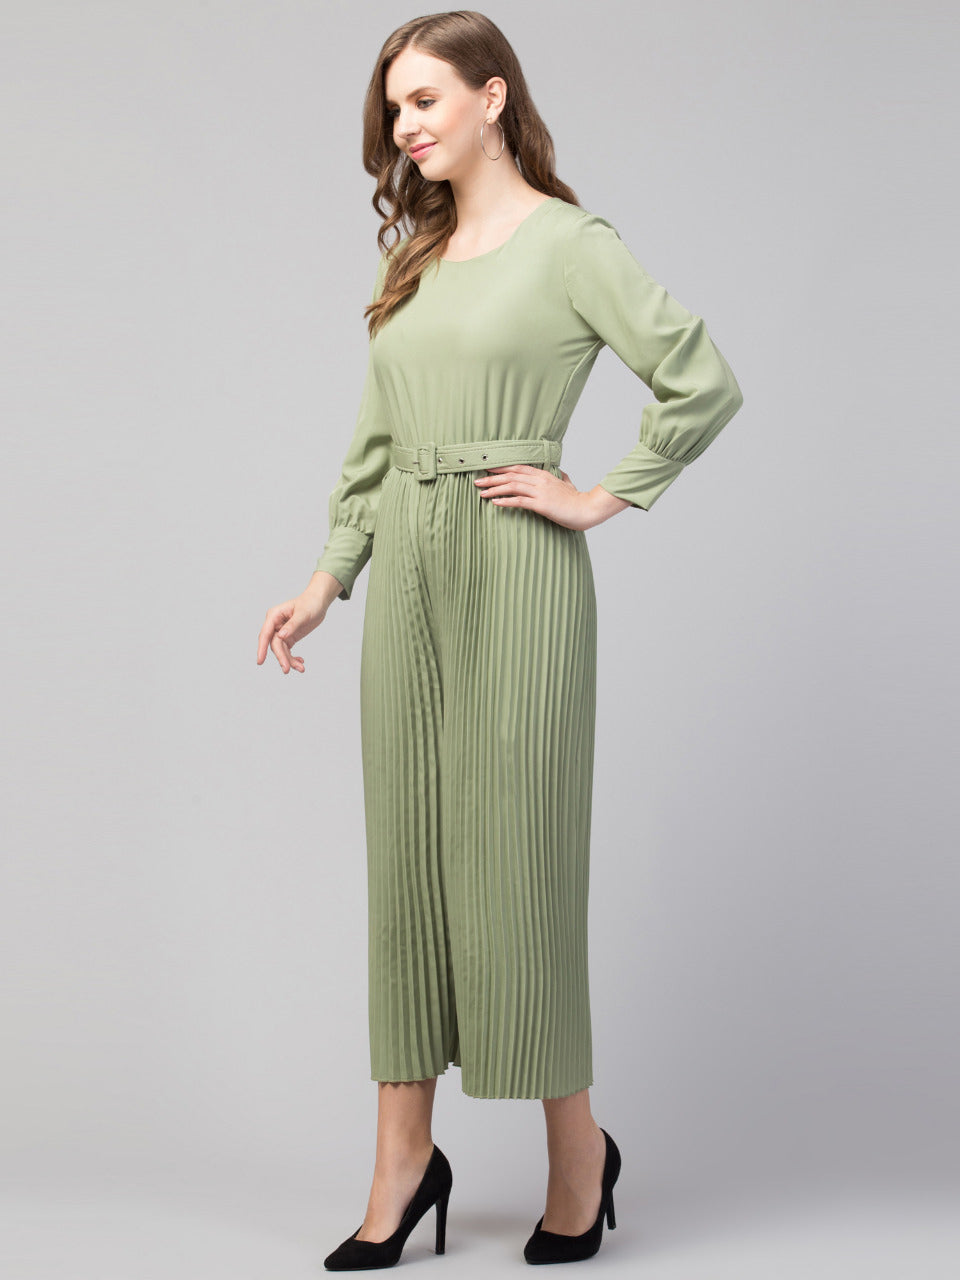 Women Girls Pleated & Gathered Belted Style Long Sleeves Round Neck Solid Jumpsuit